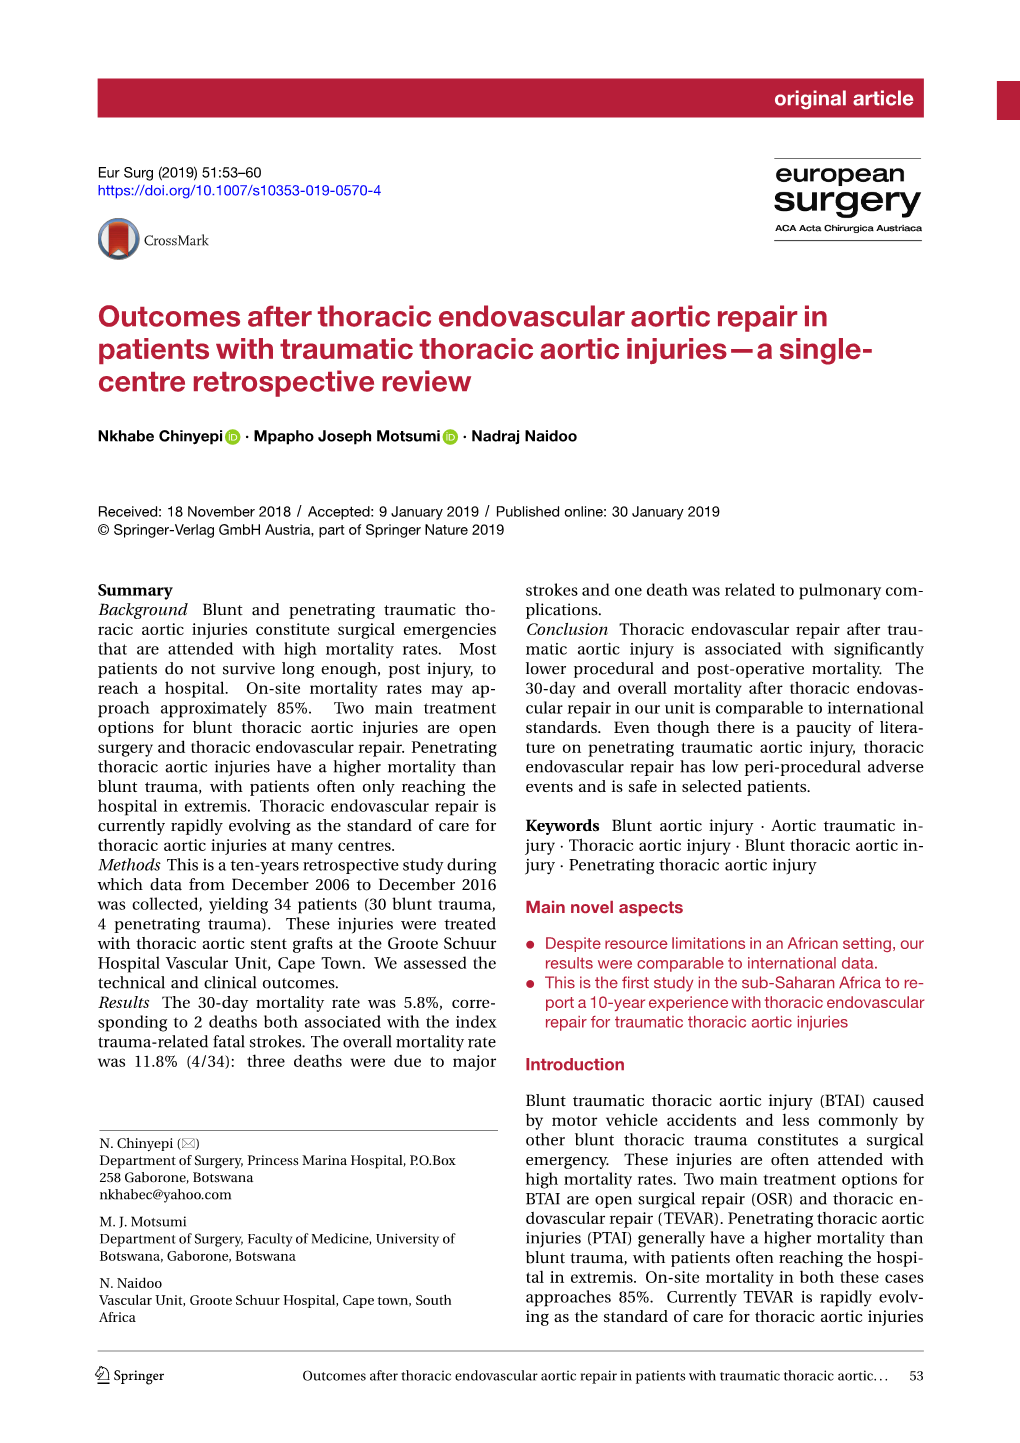 Outcomes After Thoracic Endovascular Aortic Repair in Patients with Traumatic Thoracic Aortic Injuries—A Single- Centre Retrospective Review